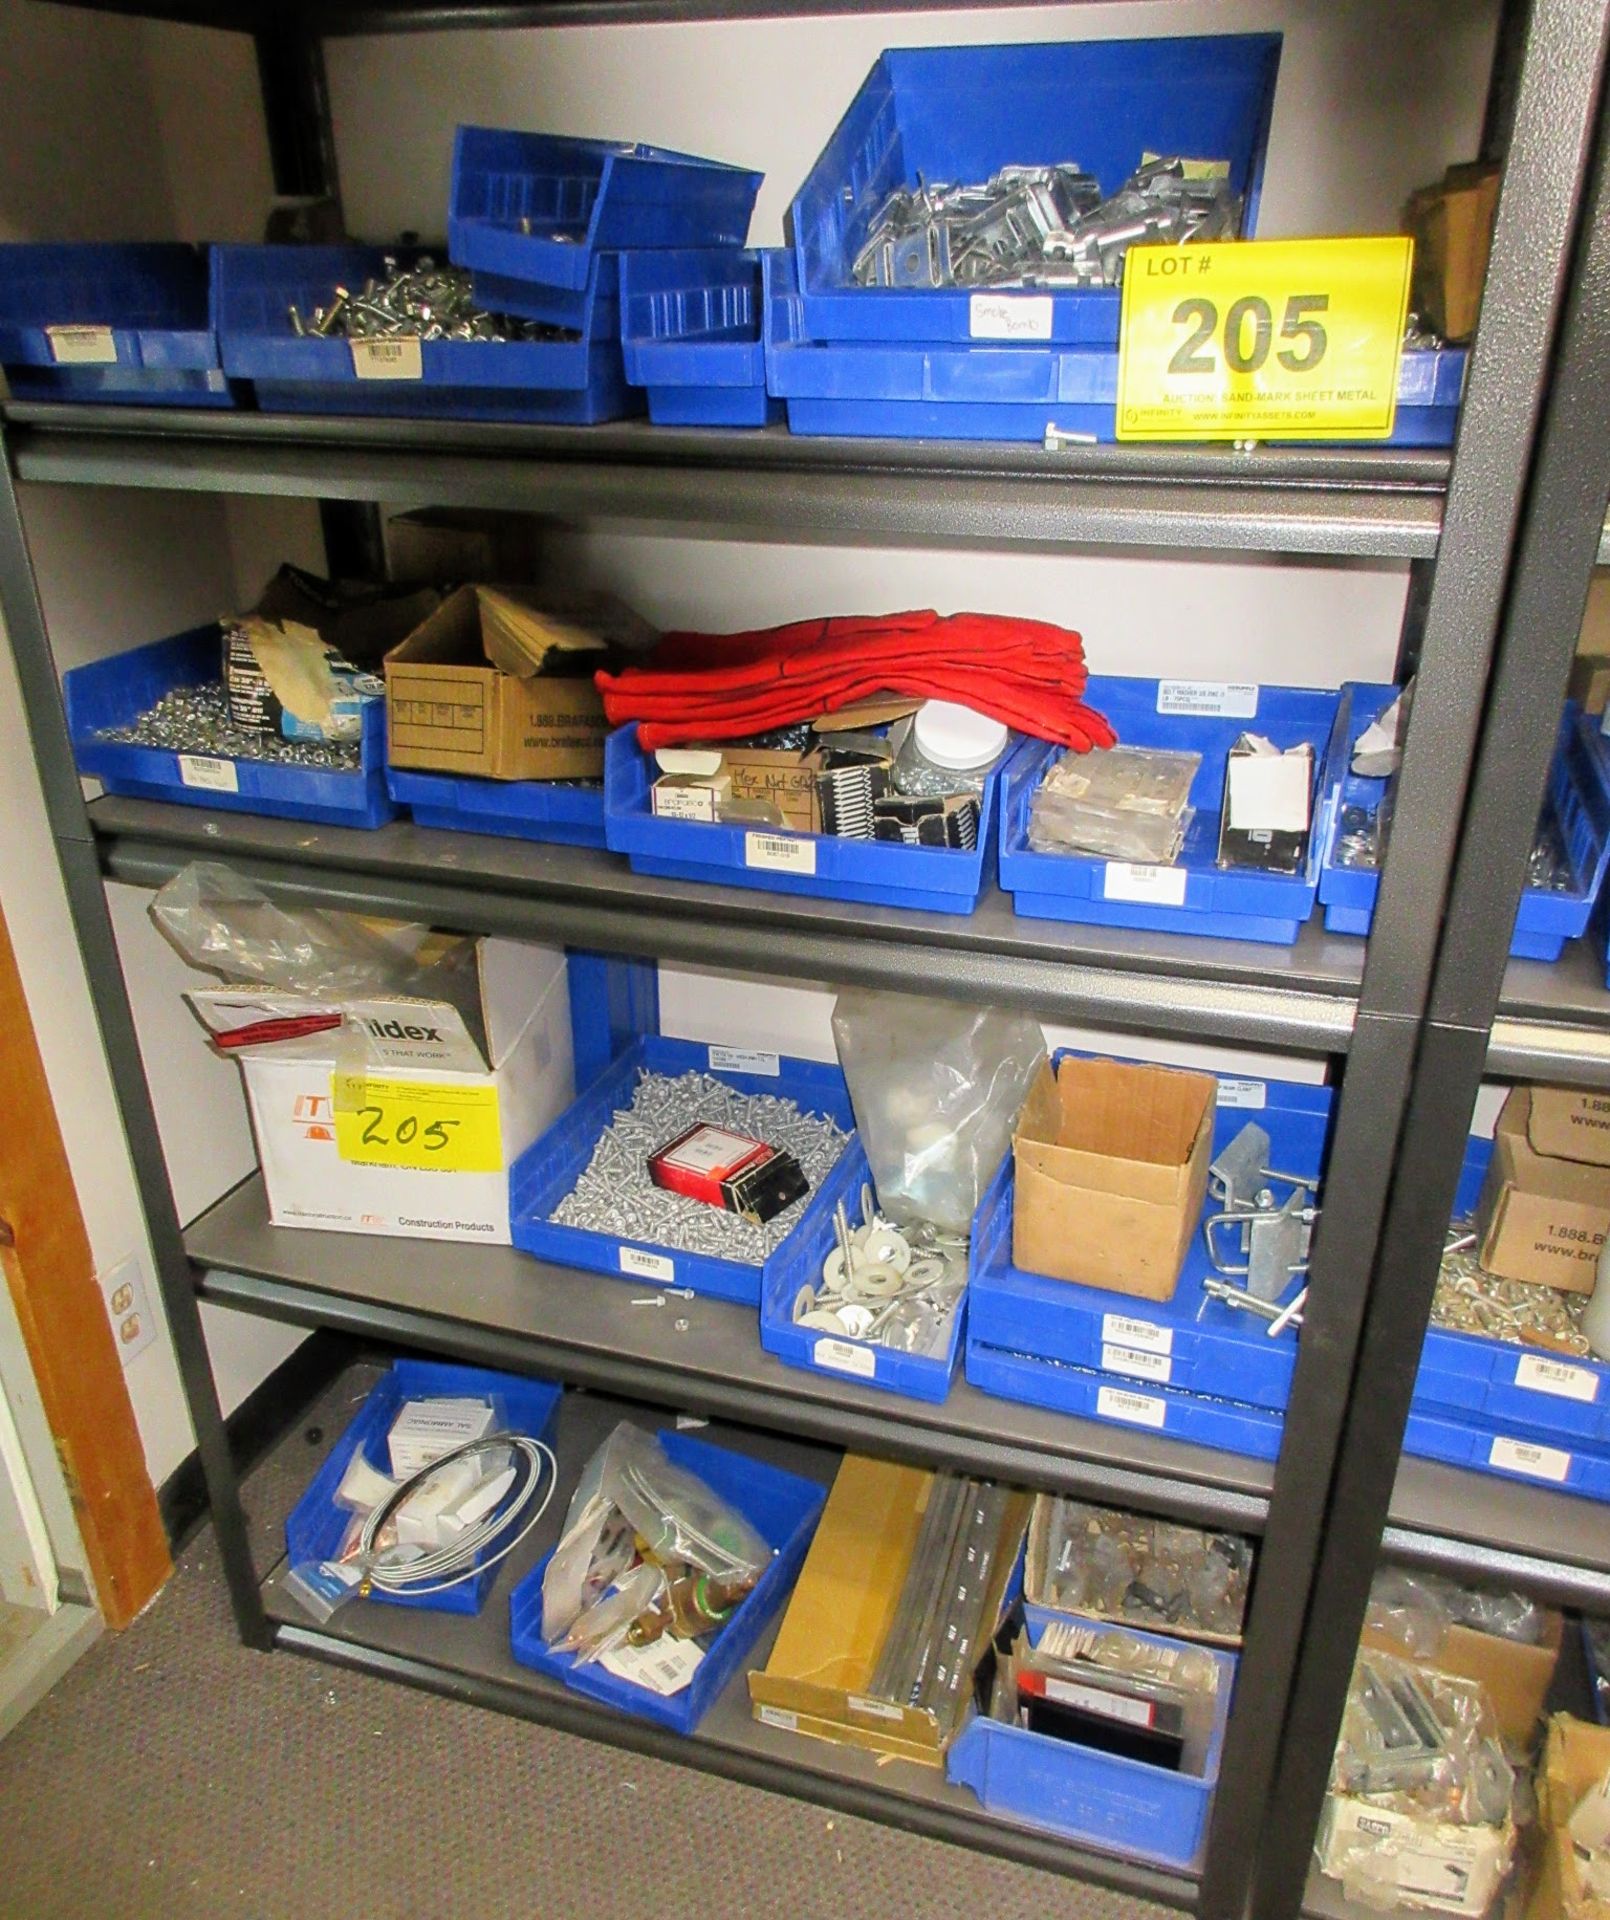 CONTENTS OF (2) SECTIONS OF SHELVING UNIT INCLUDING FASTENERS, WELDING SUPPLIES, SLEEVE ANCHORS, - Image 2 of 5